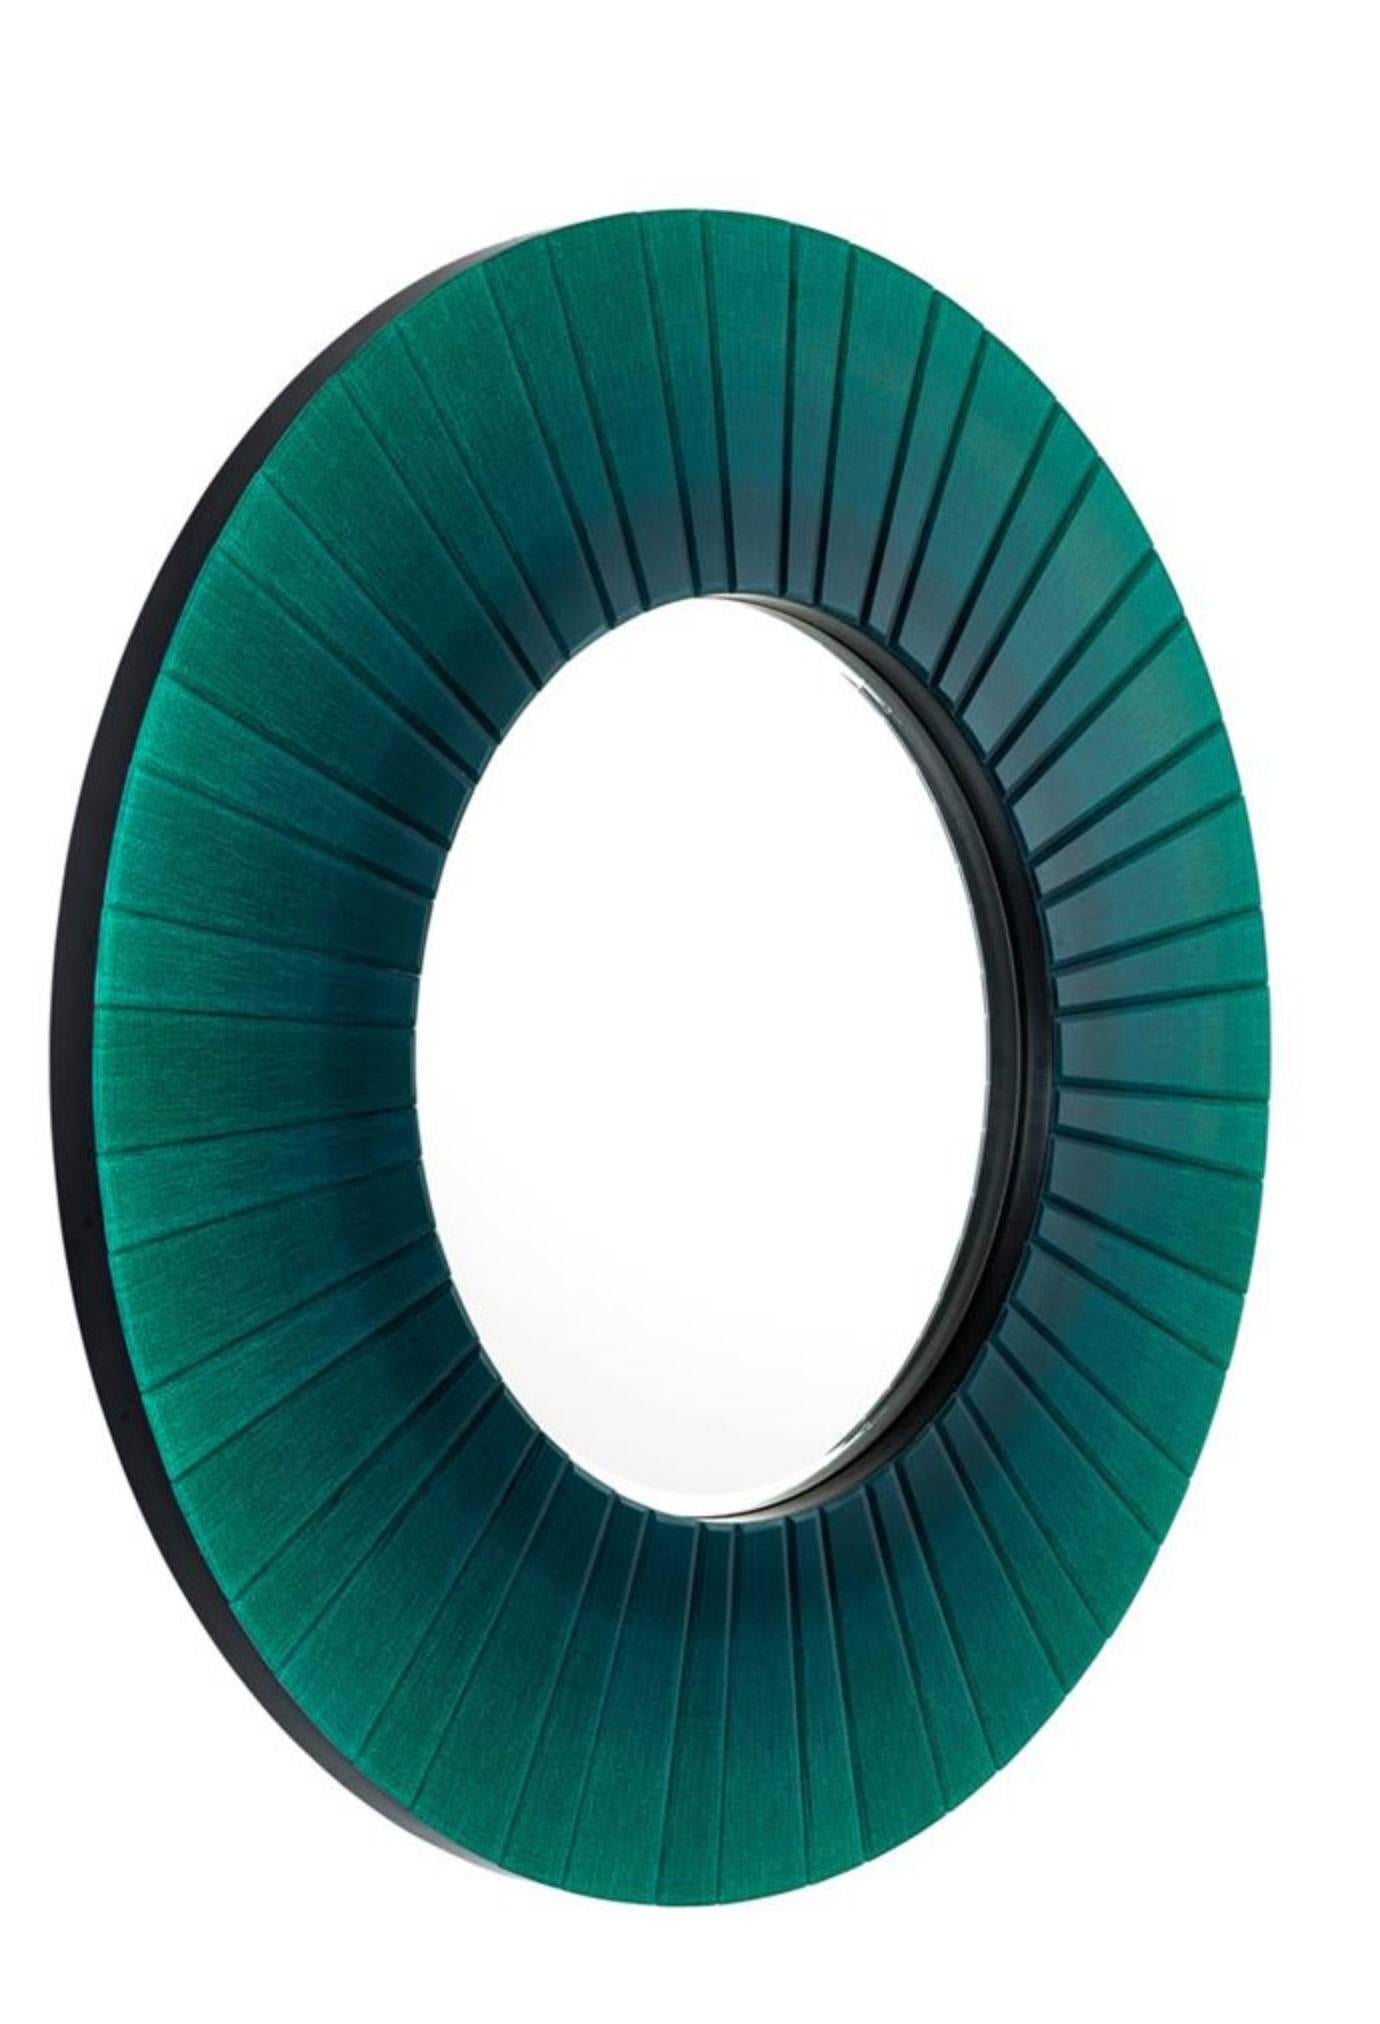 Large round beveled glass mirror. Colored glass features harmonious blue to green scheme.
 
Measurements: 43